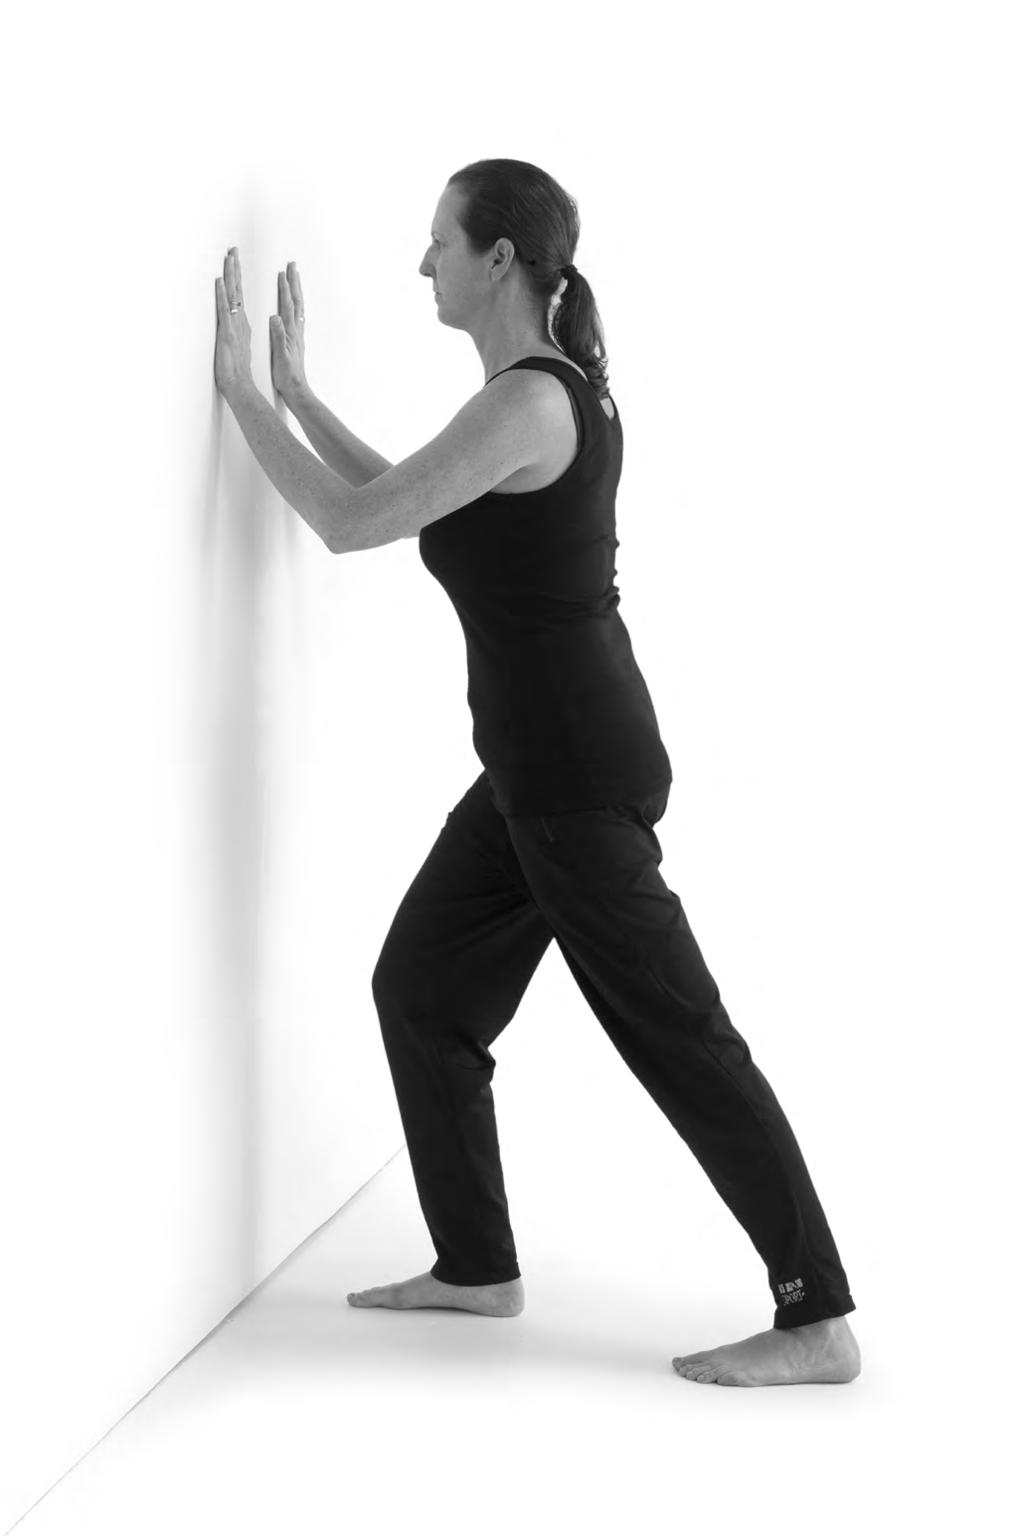 Exercises for a healthy back Good posture, body mechanics and exercise are essential to maintaining a healthy back.